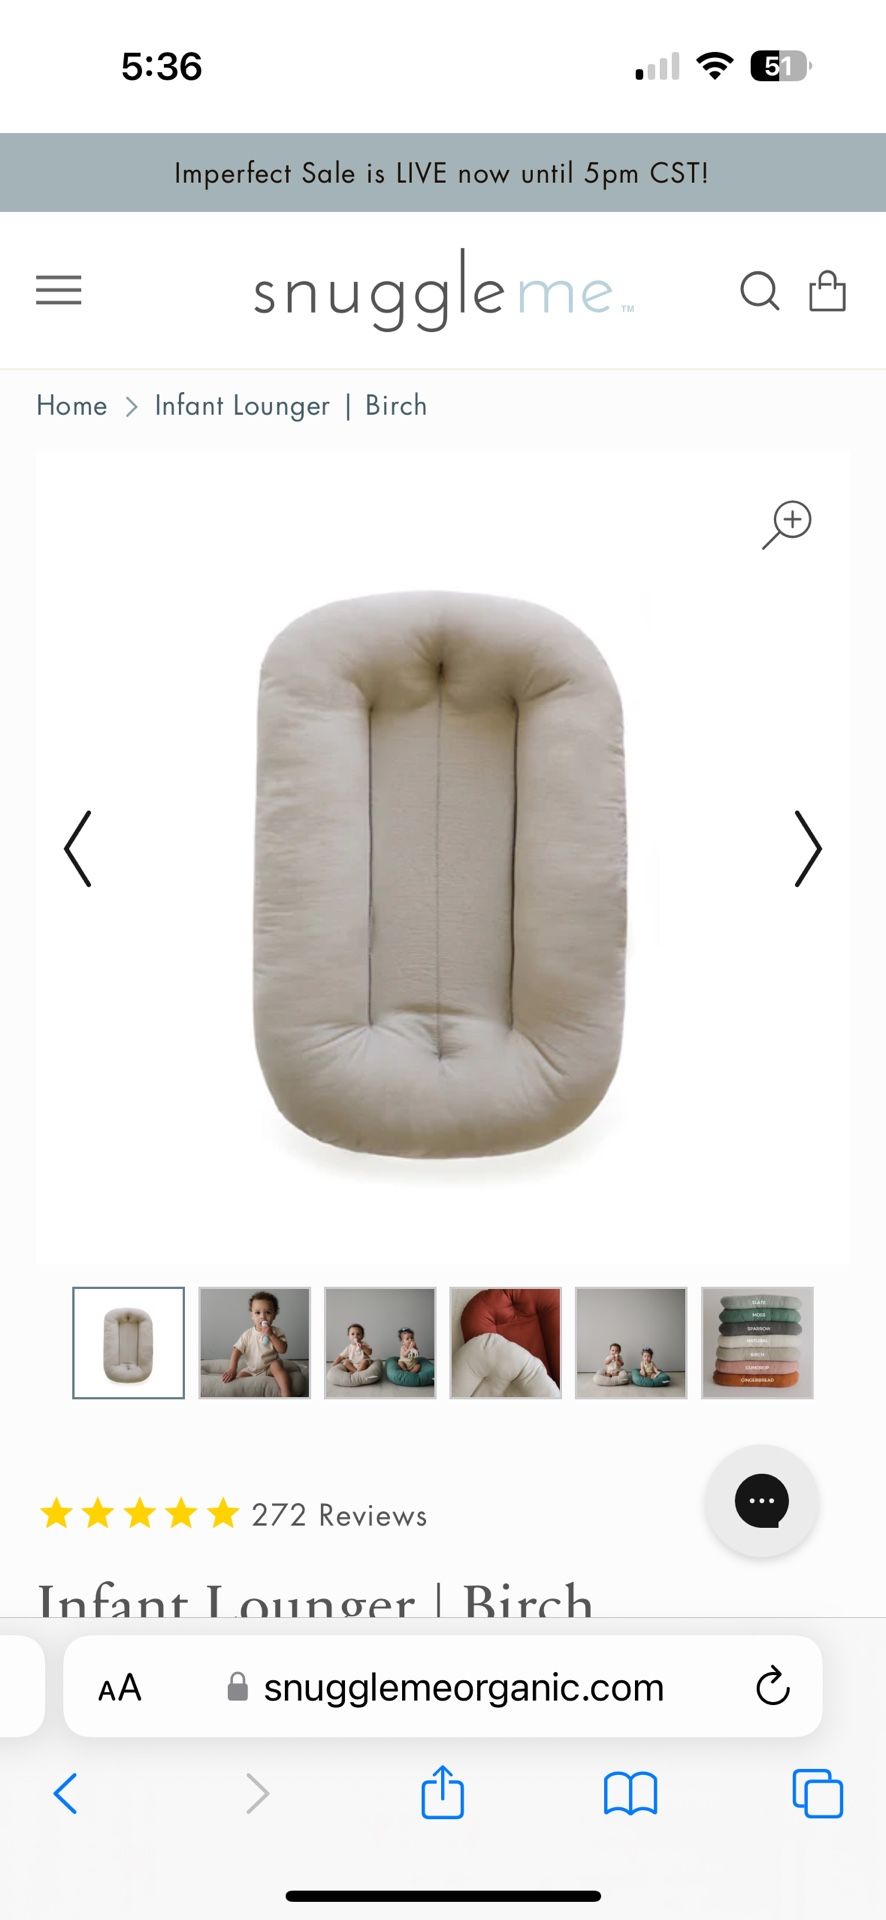 Brand new Snuggle Me Infant Lounge Bed